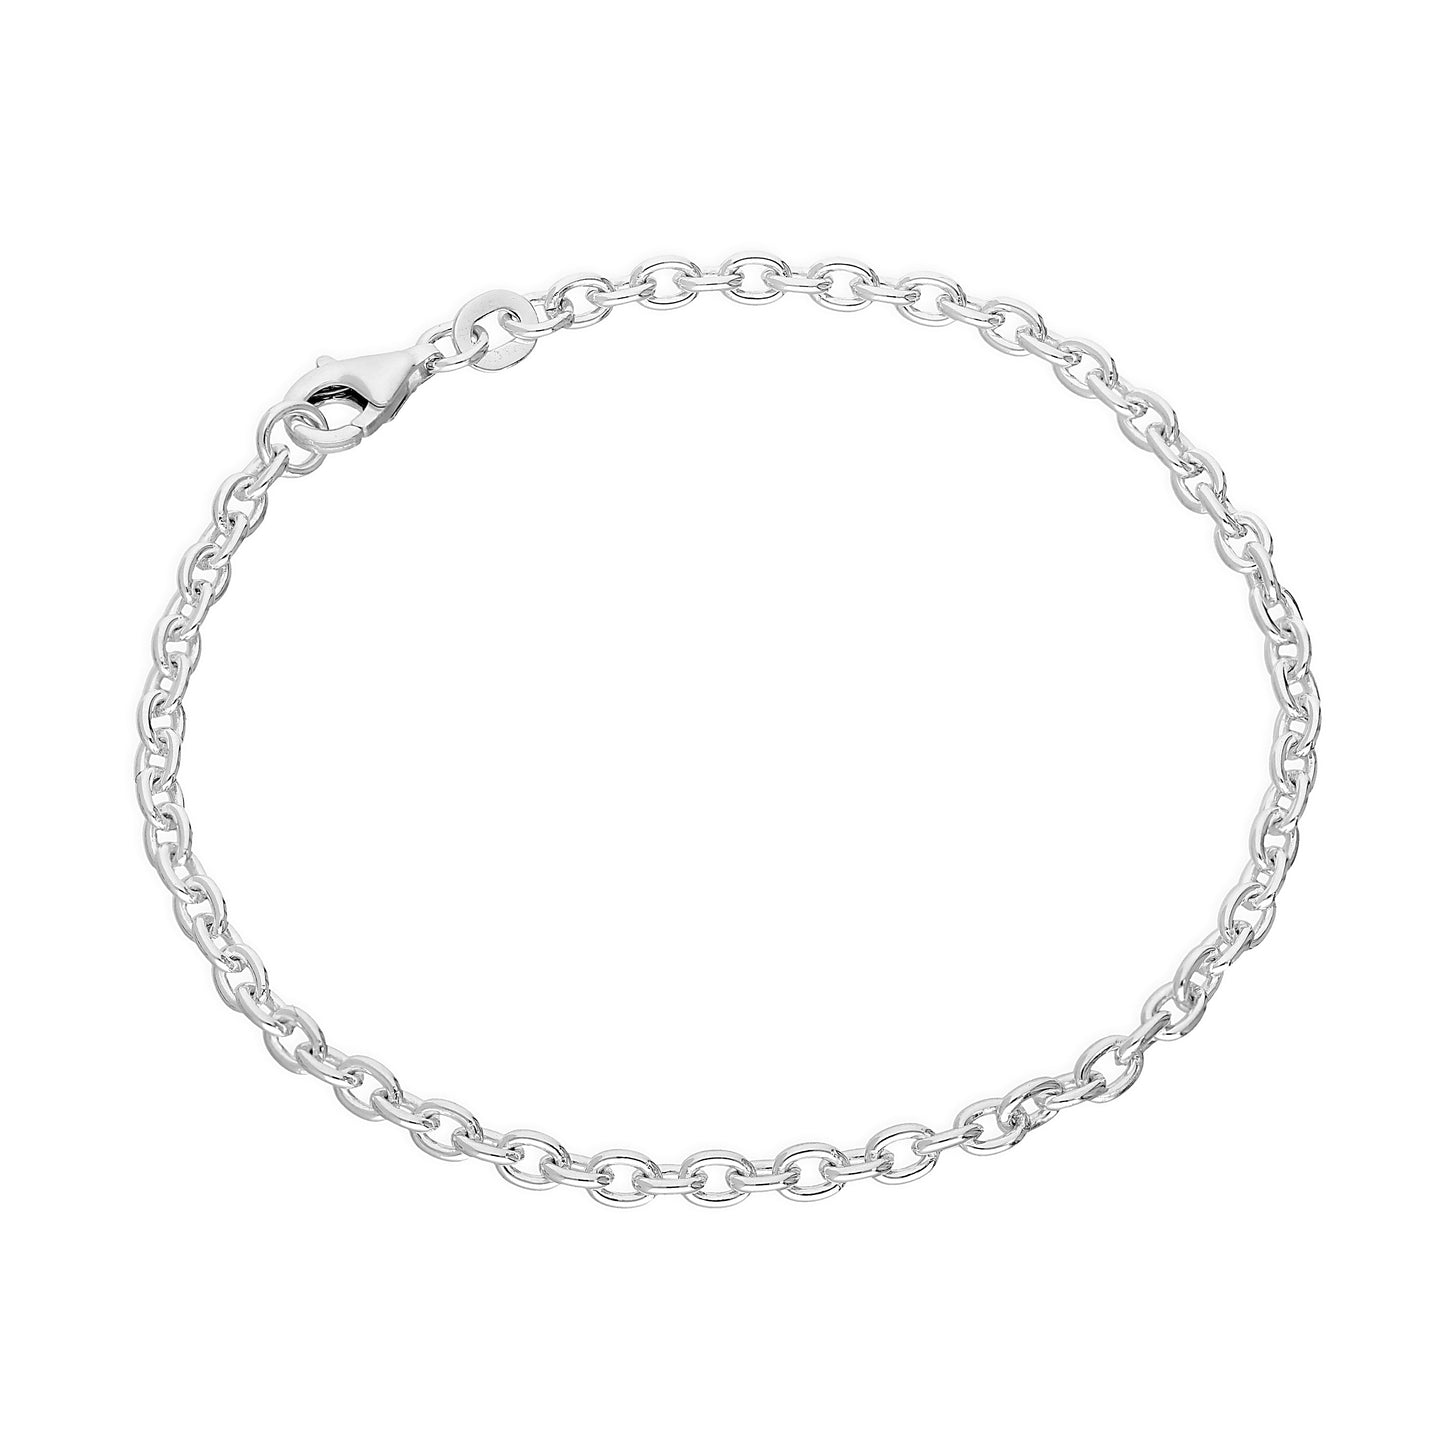 Sterling Silver Charm Bracelet 5.5 Inches 6 Inches 7 Inches 8 Inches